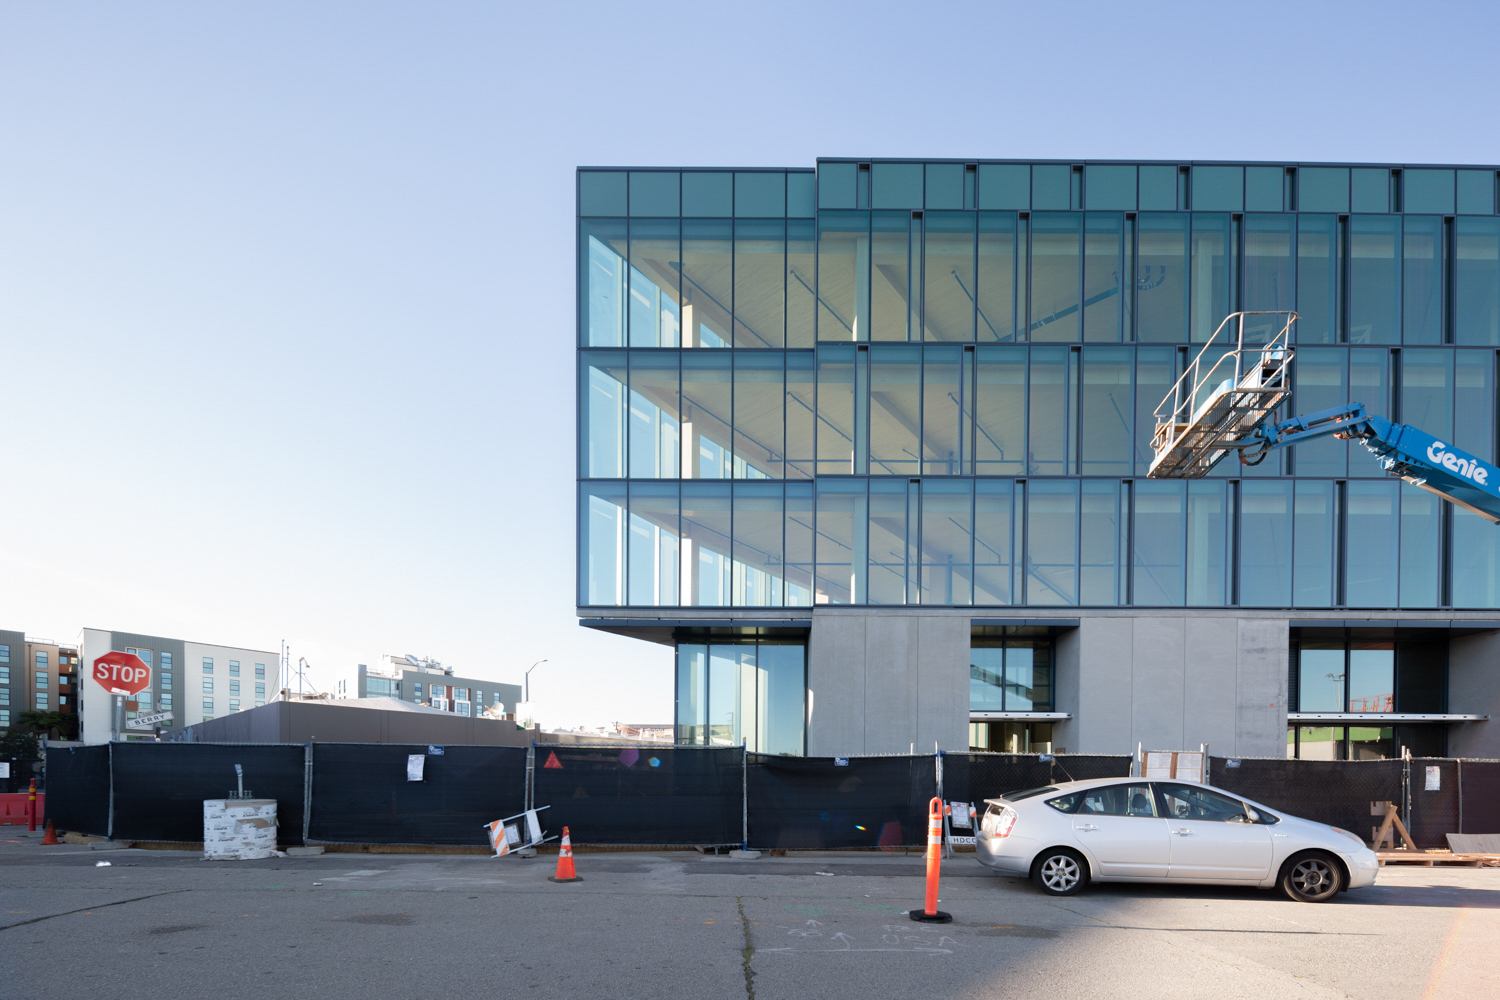 1 De Haro Street curtain wall facade, with the cross laminated timber ceiling visible, image by Andrew Campbell Nelson